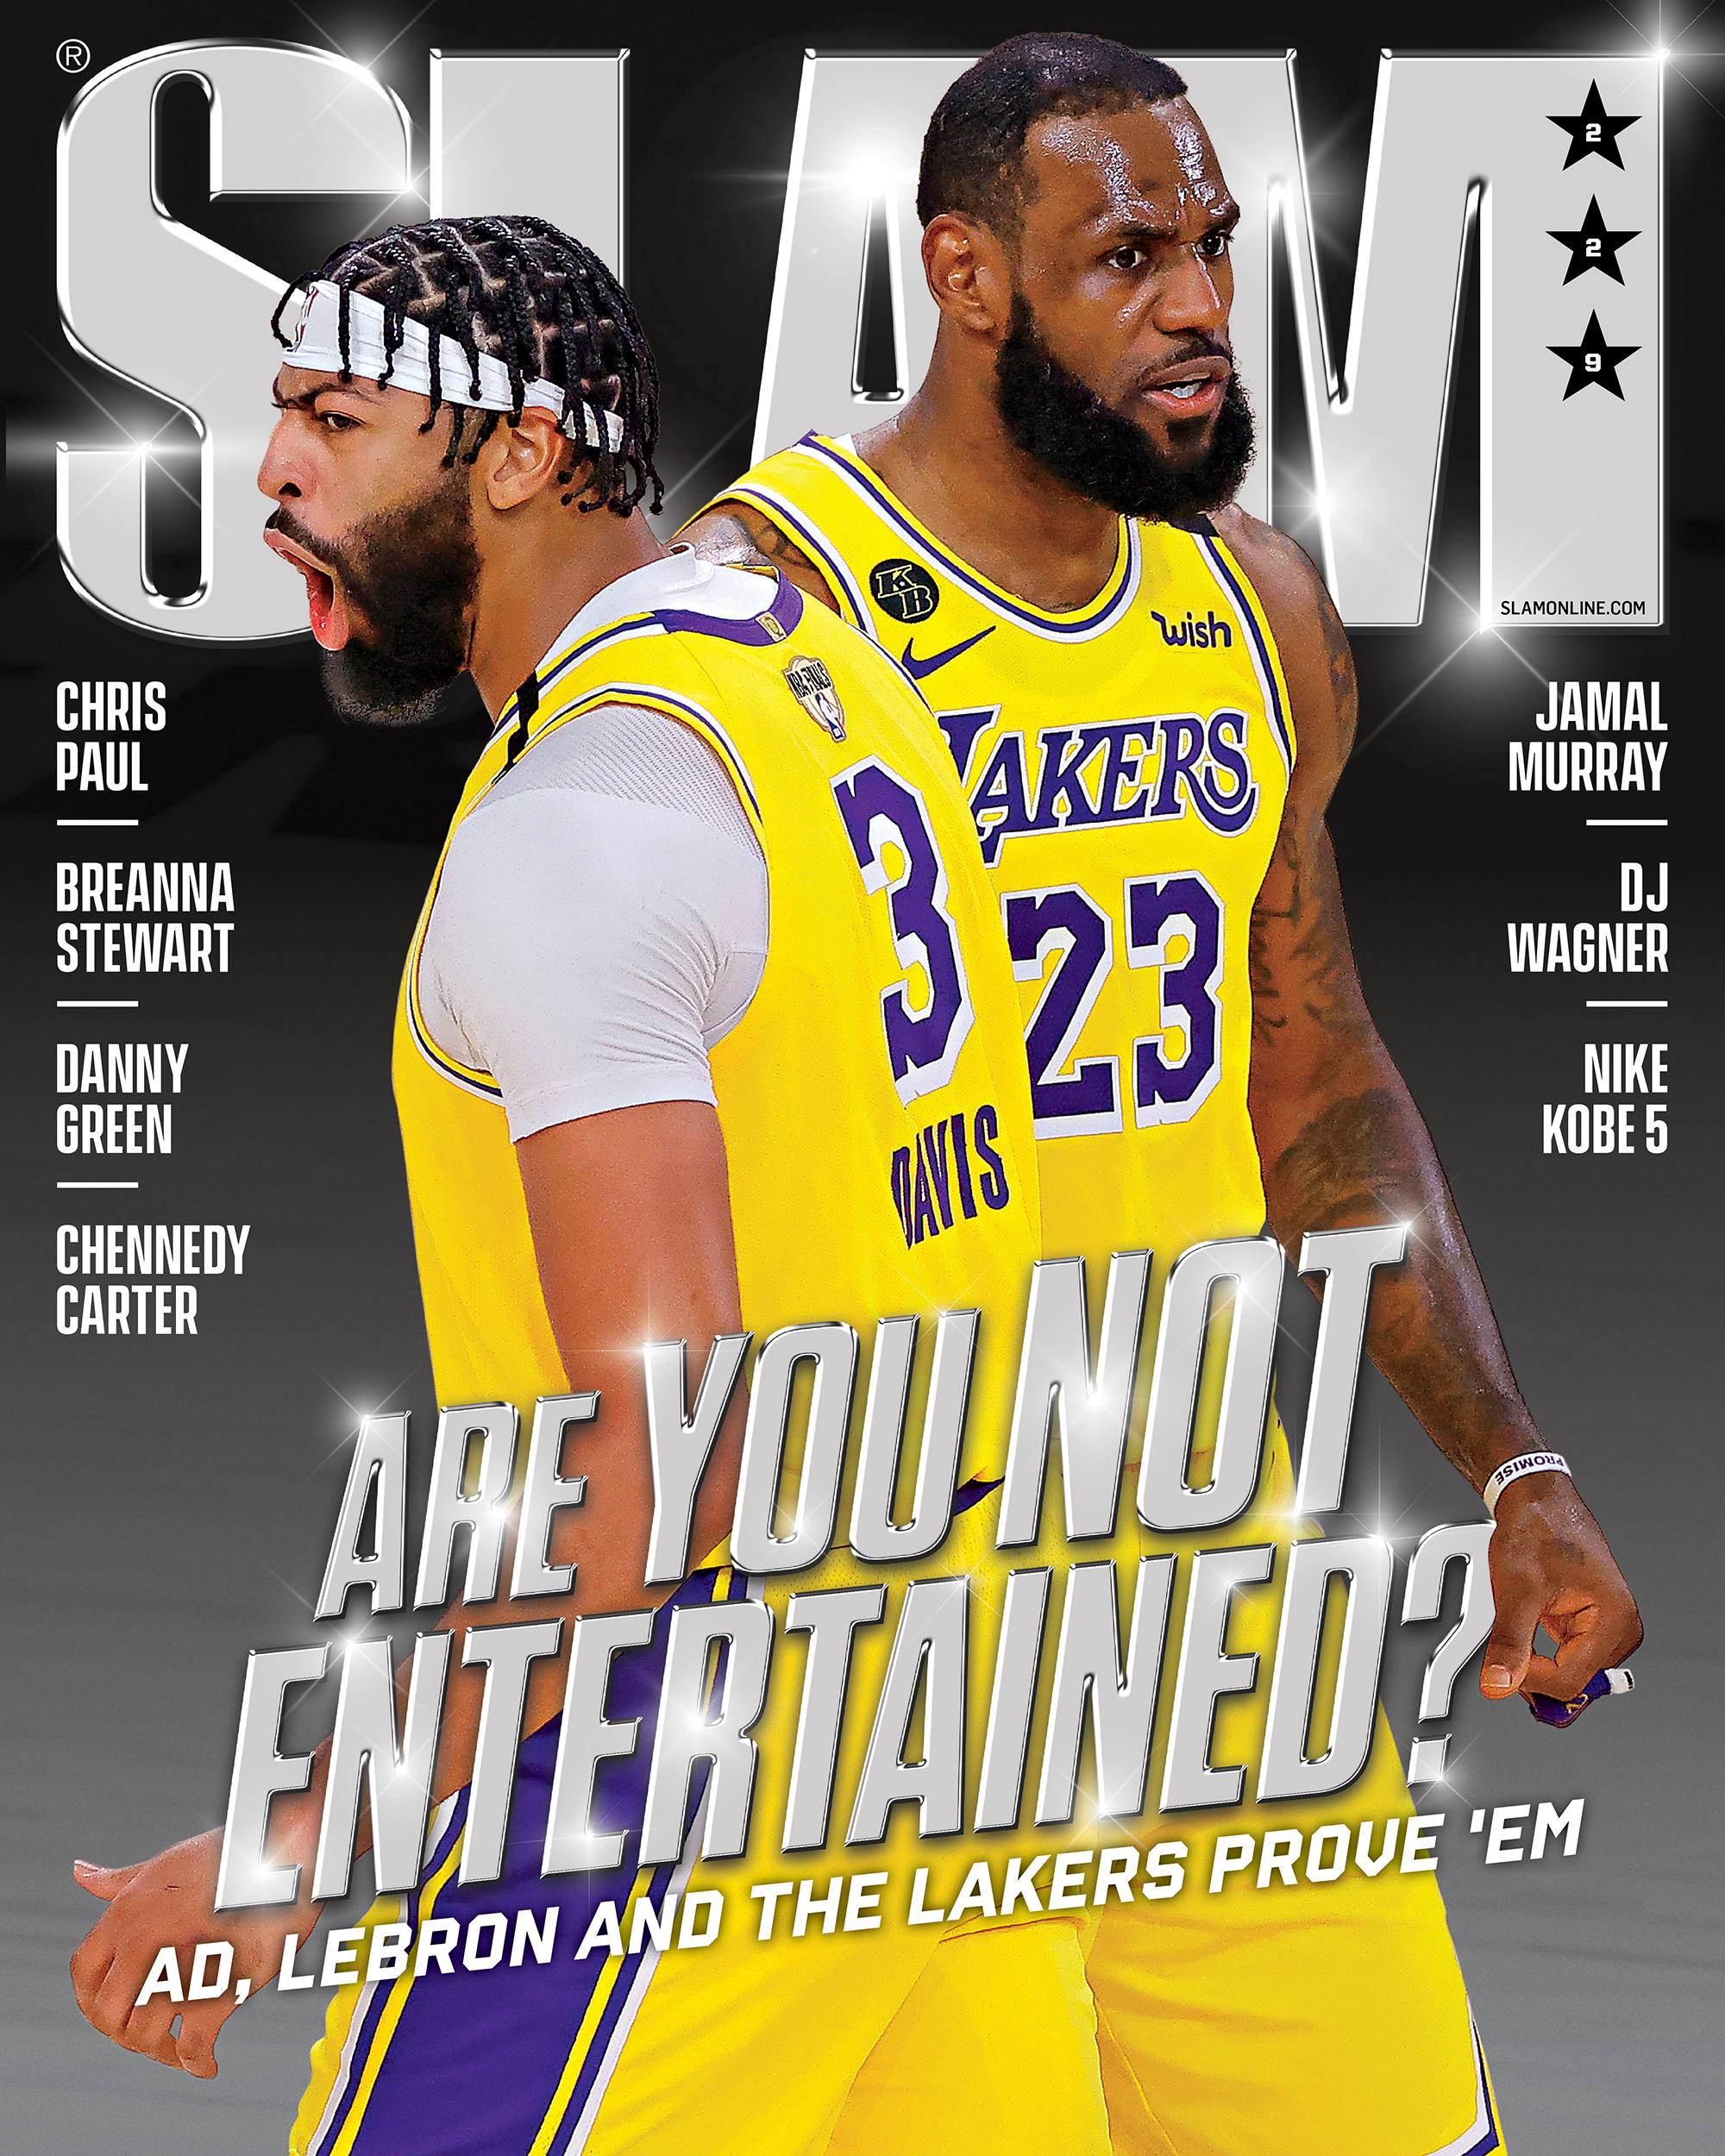 LeBron James thought his 'Hi Haters' Slam Magazine cover was 'epic